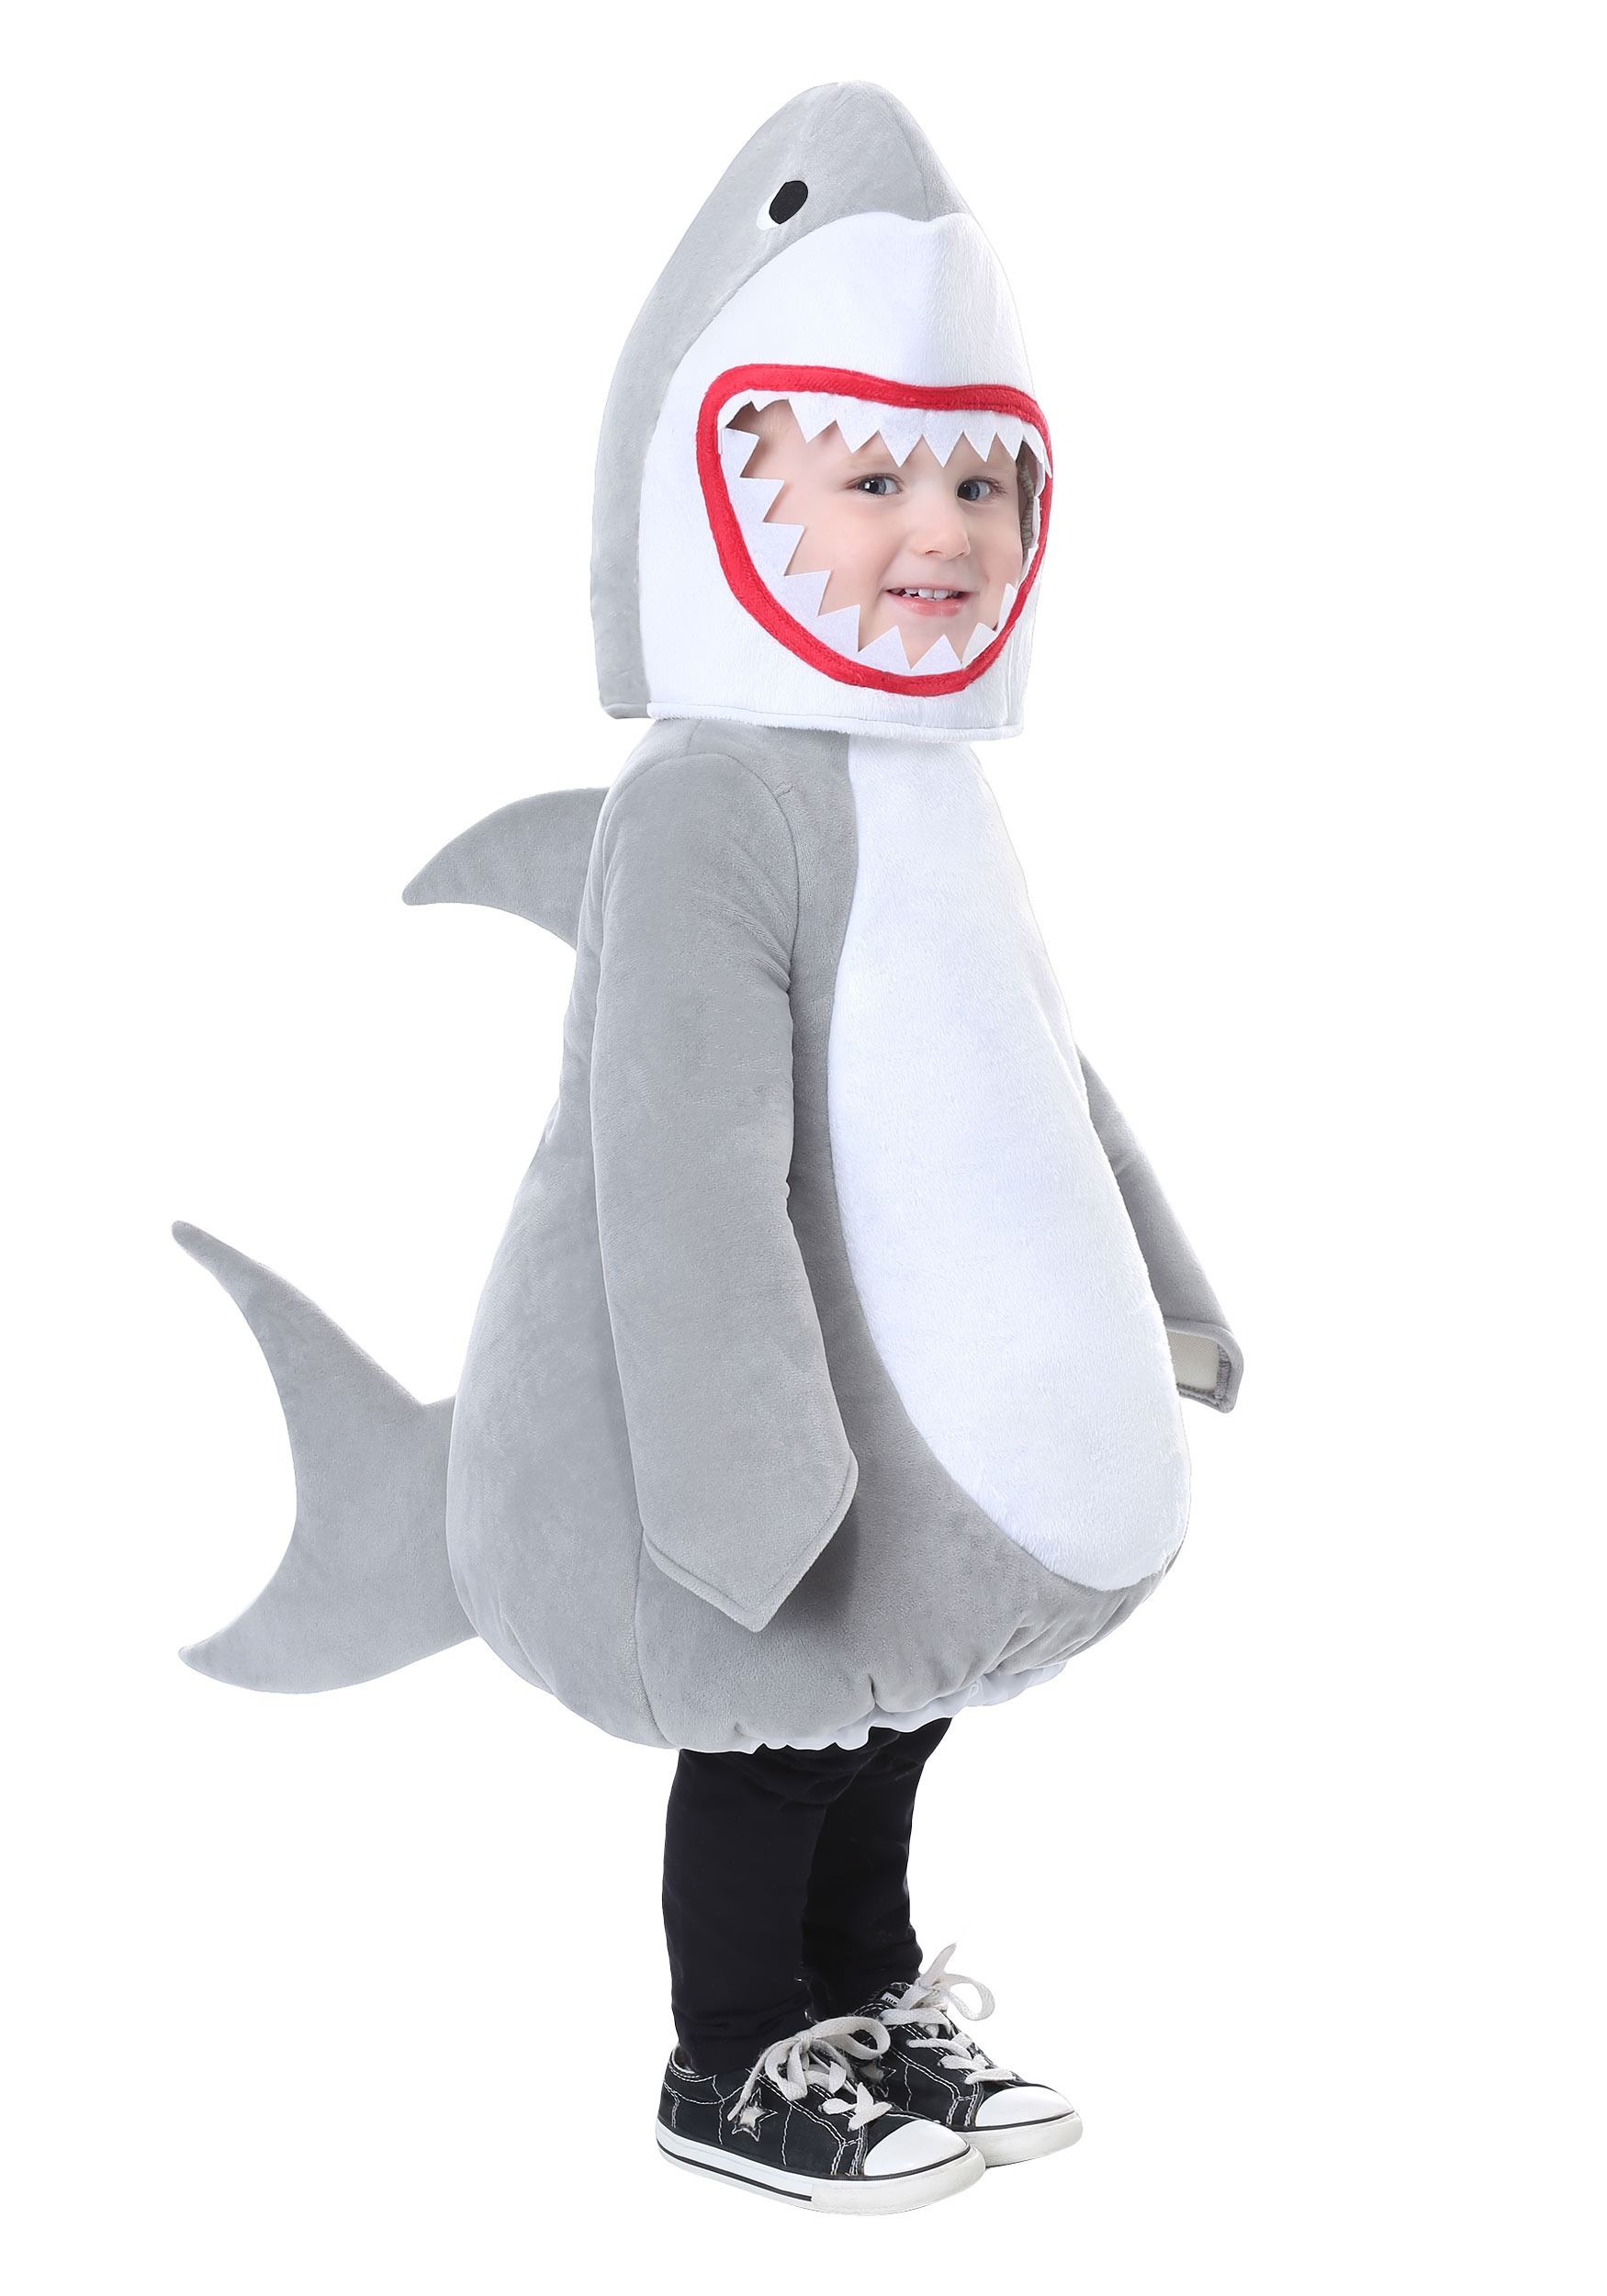 Photos - Fancy Dress Bubble FUN Costumes Infant/Toddler  Shark Costume Gray/Red/White 